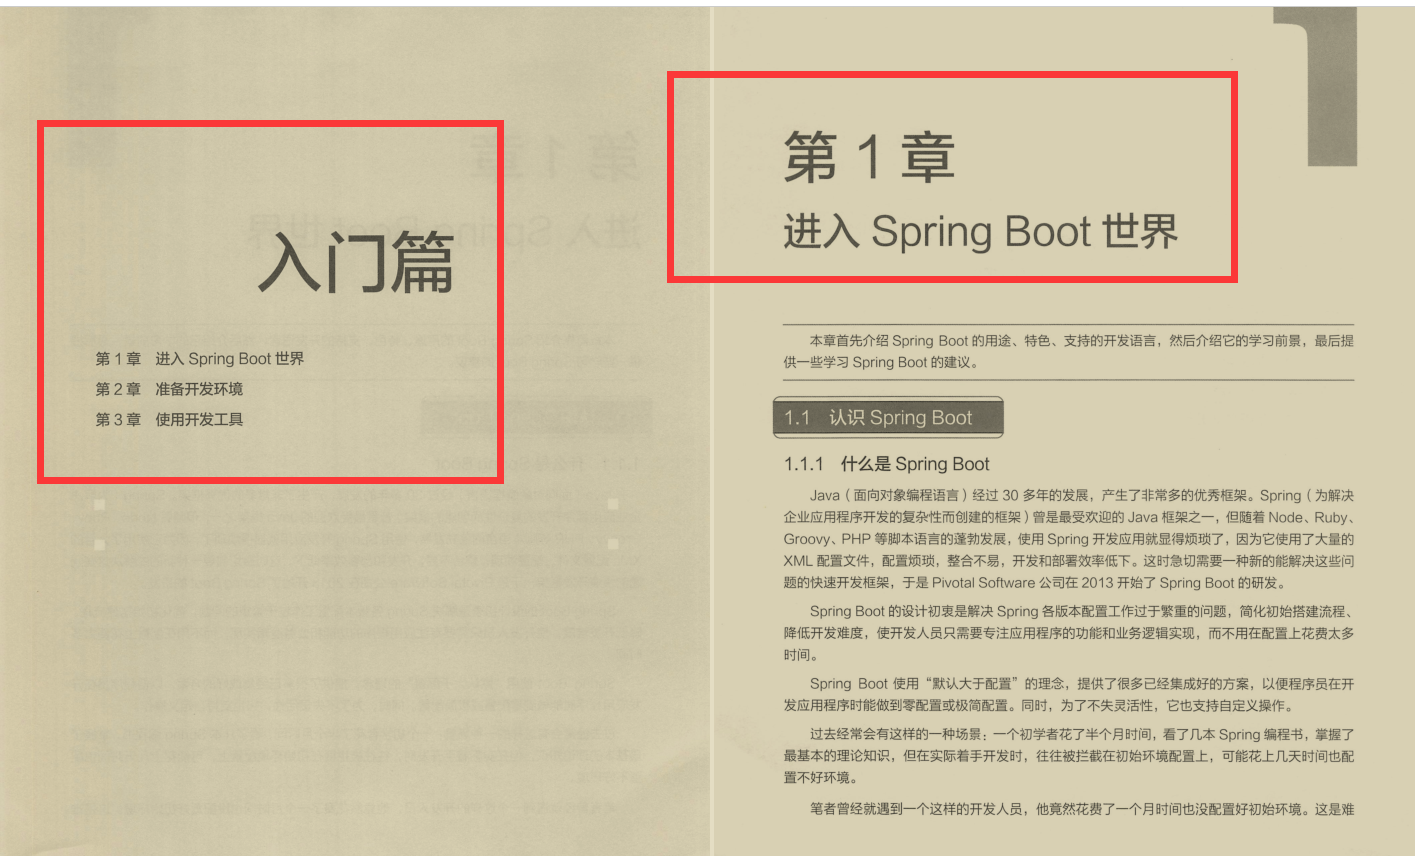 Demystifying the Alibaba SpringBoot project notes GitHub has been recommended by tens of millions